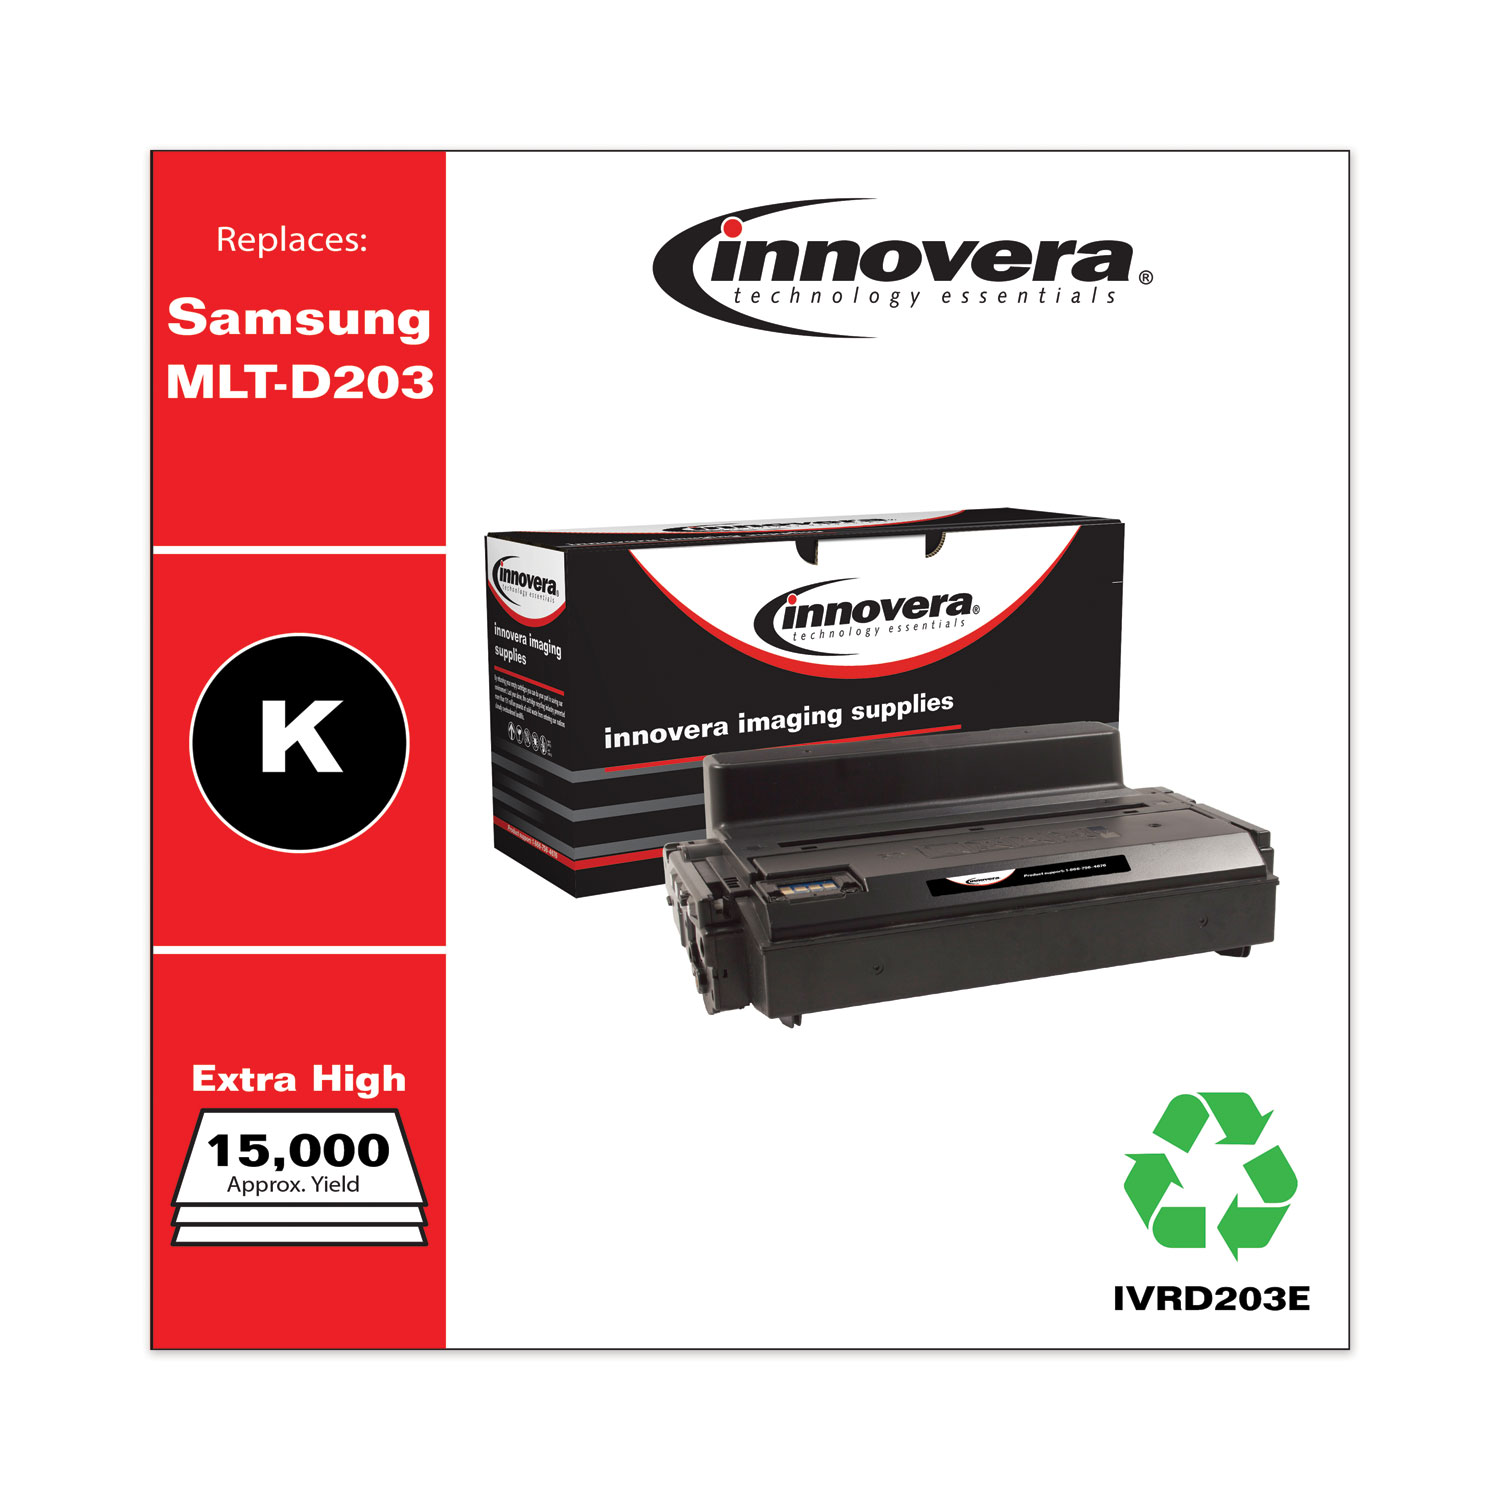 Innovera Remanufactured Black Extra High-yield Toner, Replacement For Mlt-d203e (su890a), 10,000 Page-yield - image 1 of 2